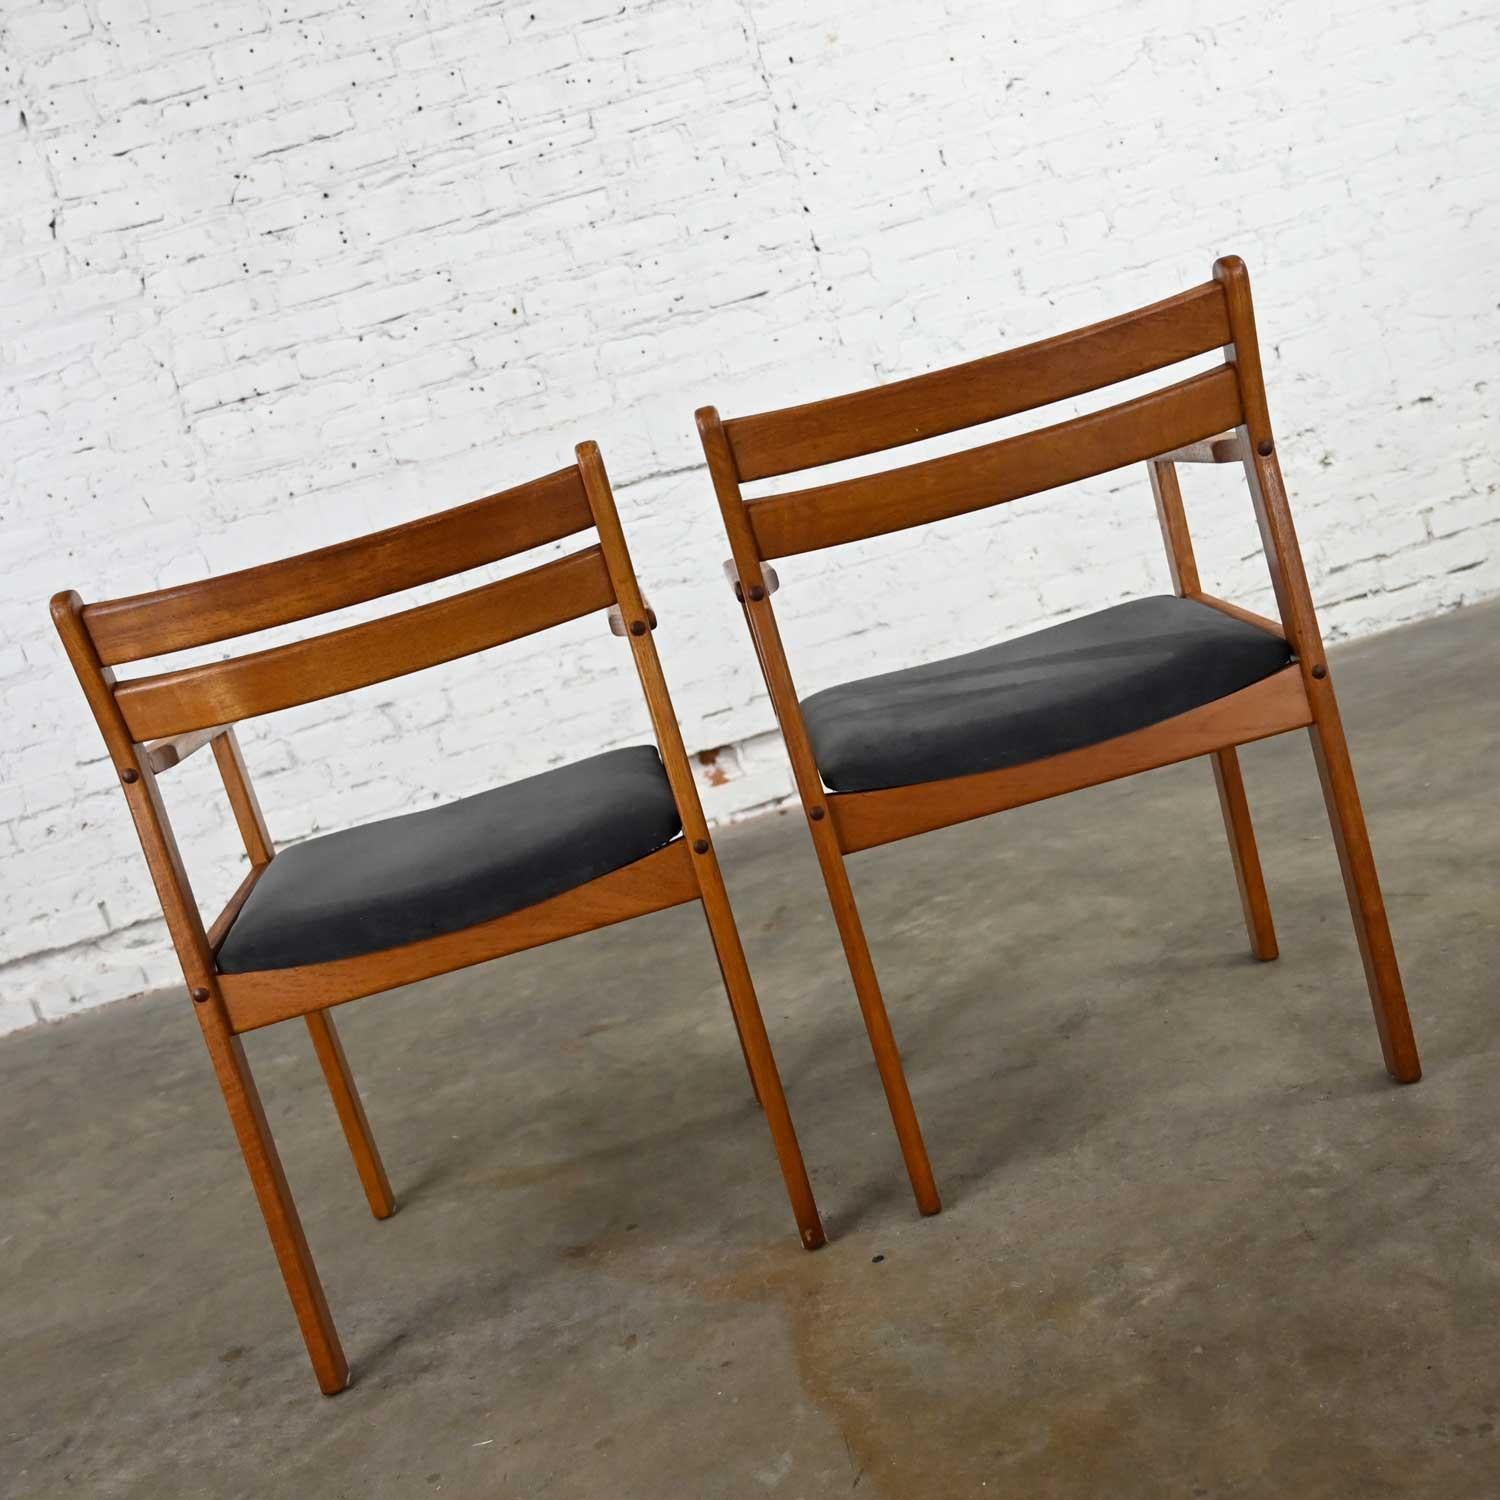 Danish Scandinavian Modern Teak Pair of Armchairs with Brushed Charcoal Fabric Seats For Sale